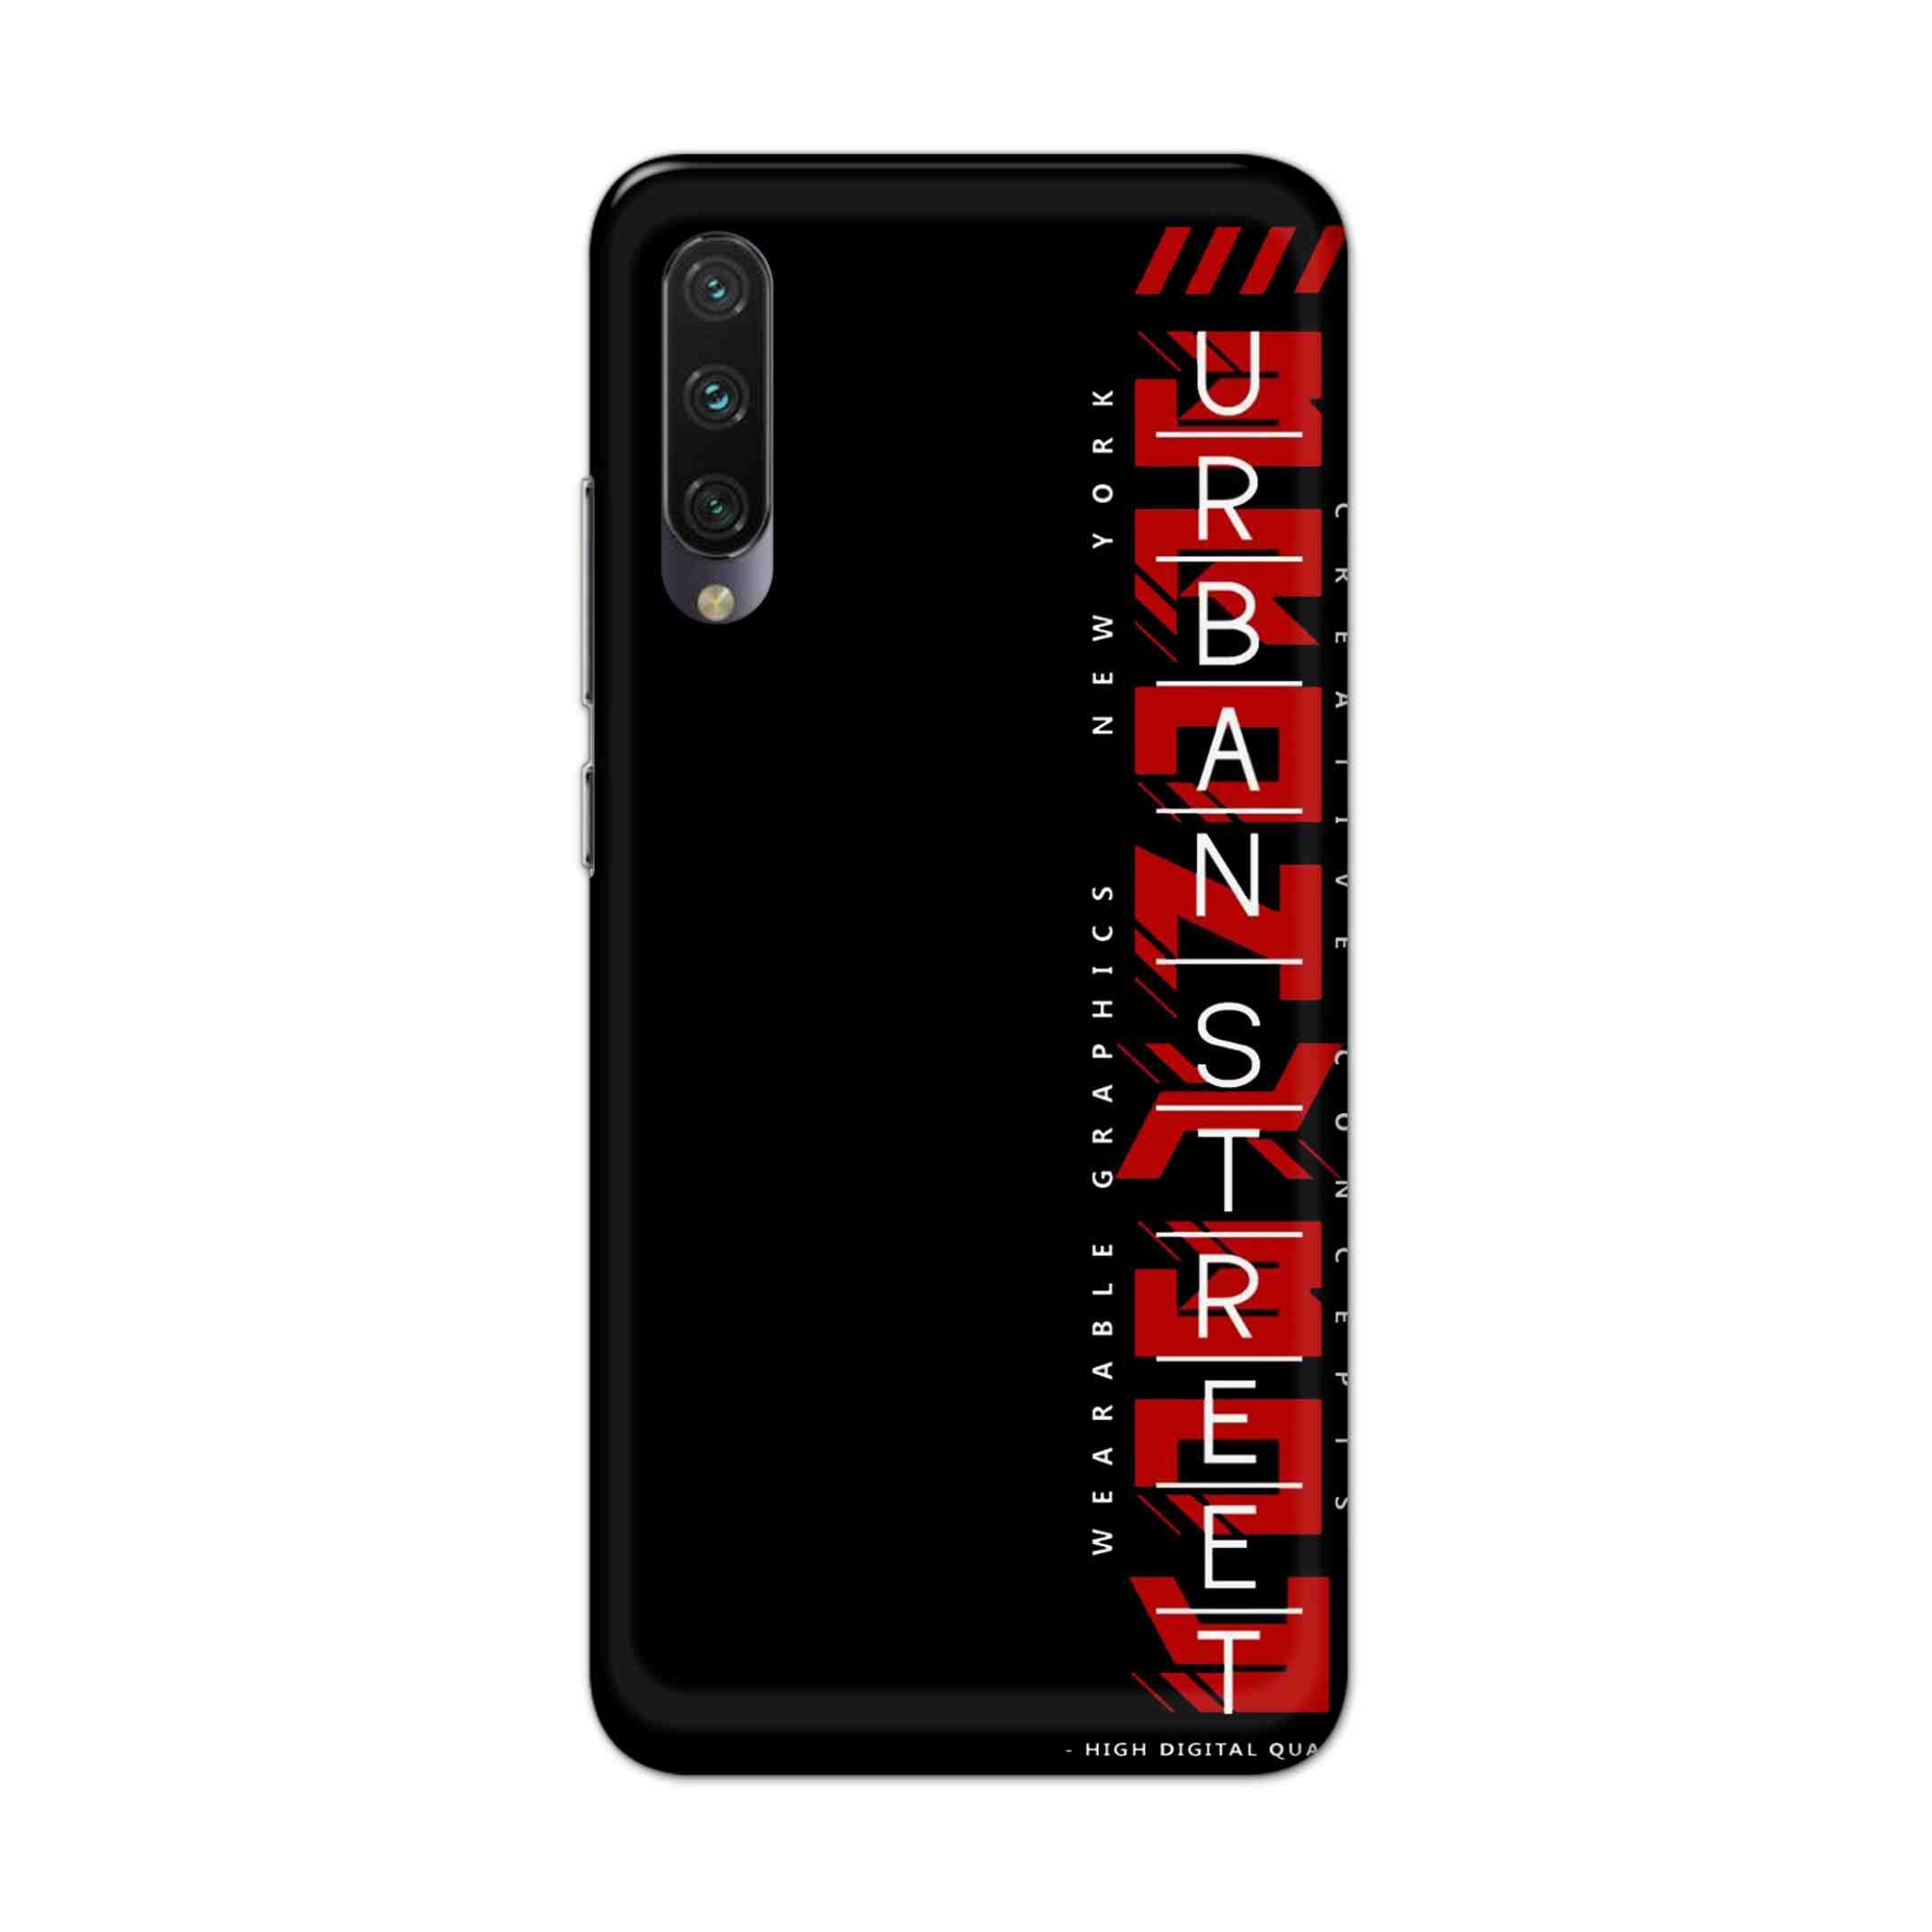 Buy Urban Street Hard Back Mobile Phone Case Cover For Xiaomi Mi A3 Online